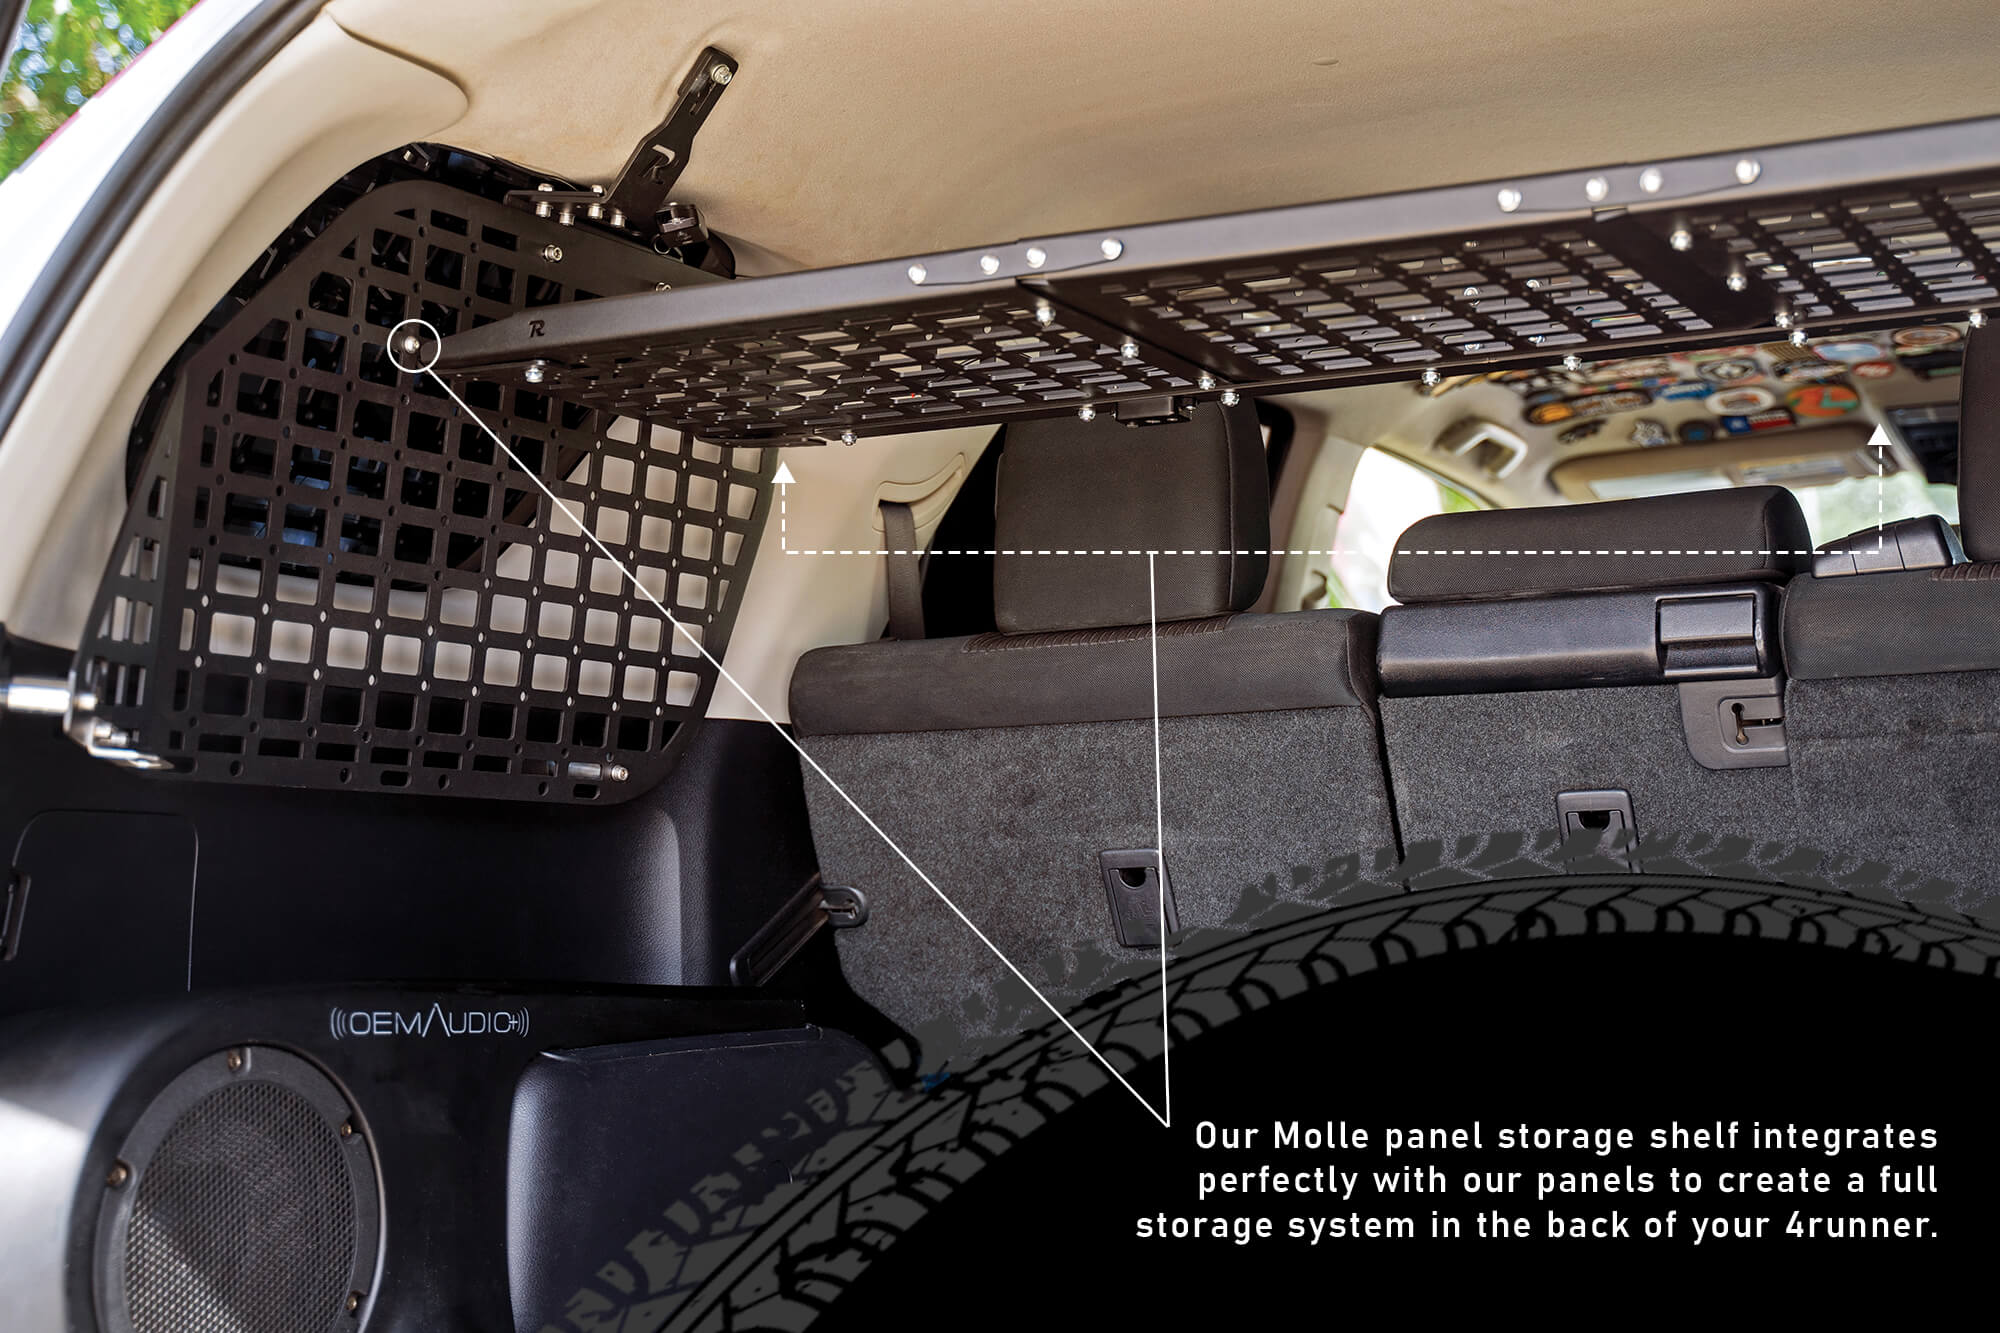 Image Text: Our Molle panel storage shelf integrates perfectly with our panels to create a full storage system in the back of your 4Runner